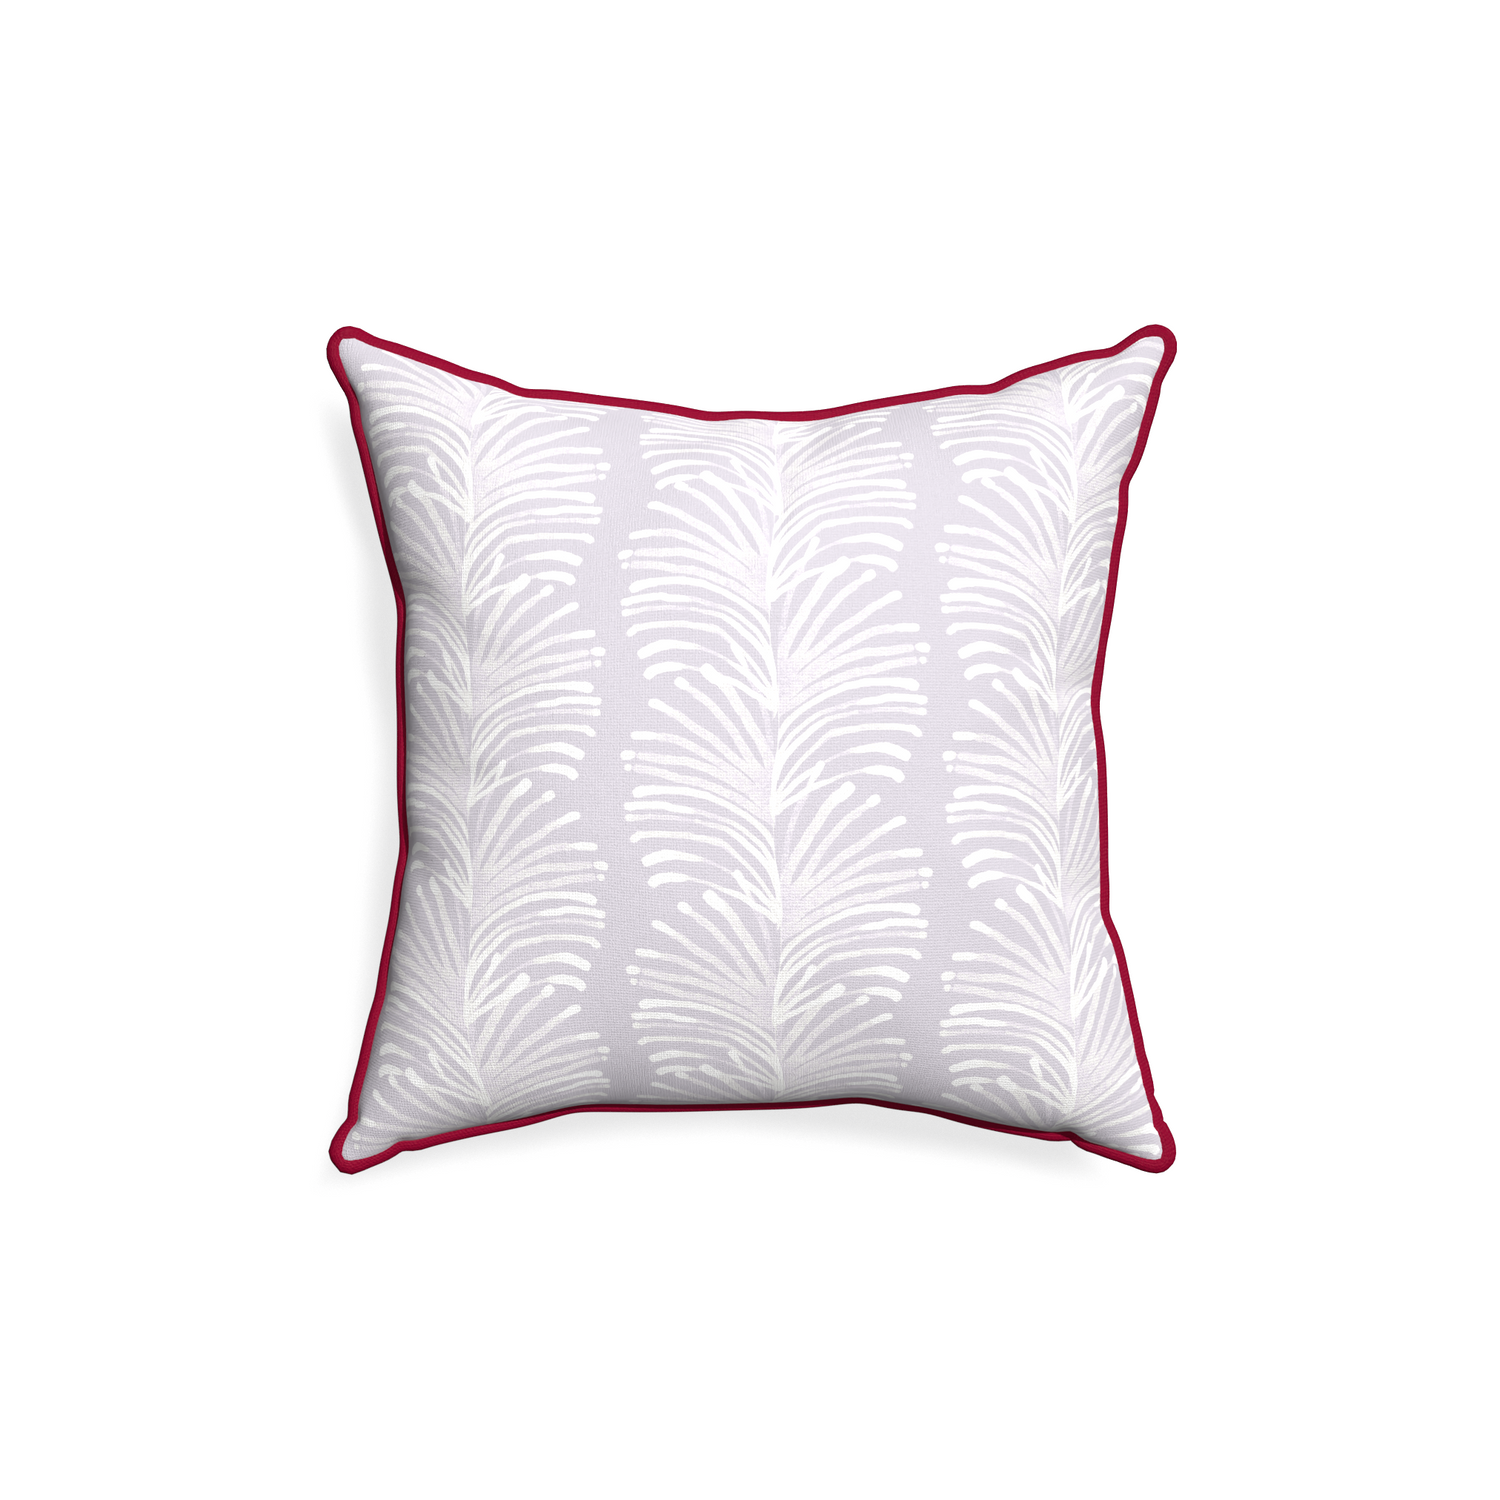 18-square emma lavender custom pillow with raspberry piping on white background